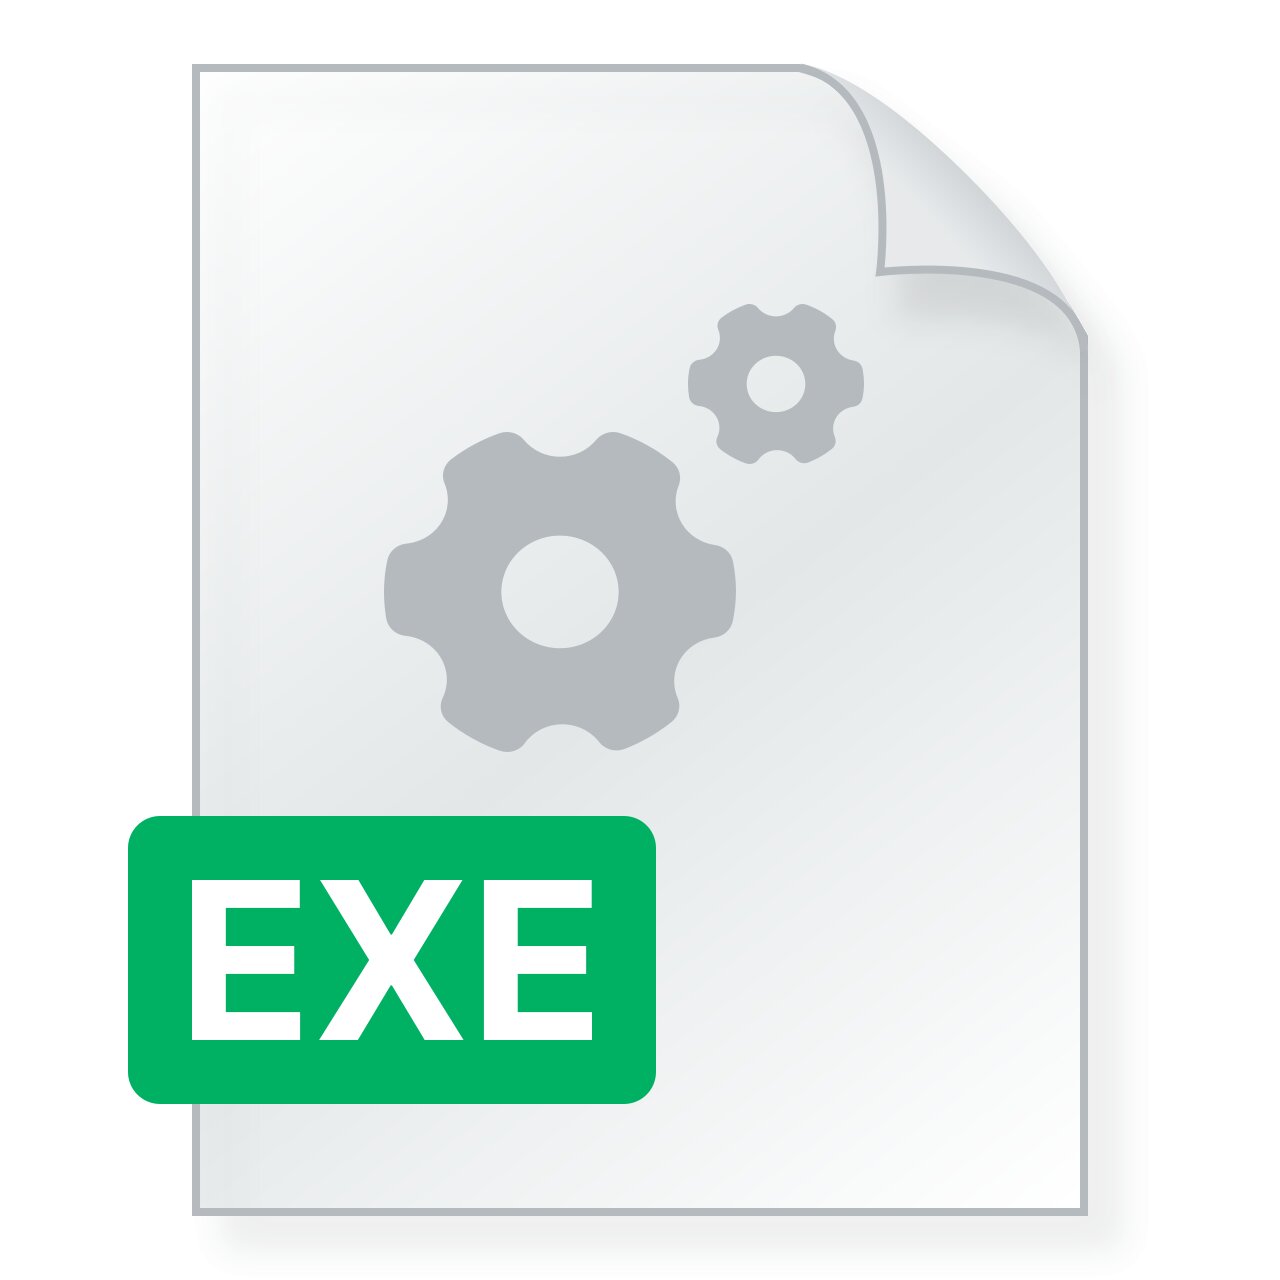 Remove unnecessary beremote.exe files: Delete any duplicate or unnecessary beremote.exe files to avoid any conflicts or errors.
Repair beremote.exe errors: If you encounter errors related to beremote.exe, try repairing the file using the built-in Windows repair tools or third-party system optimization software.